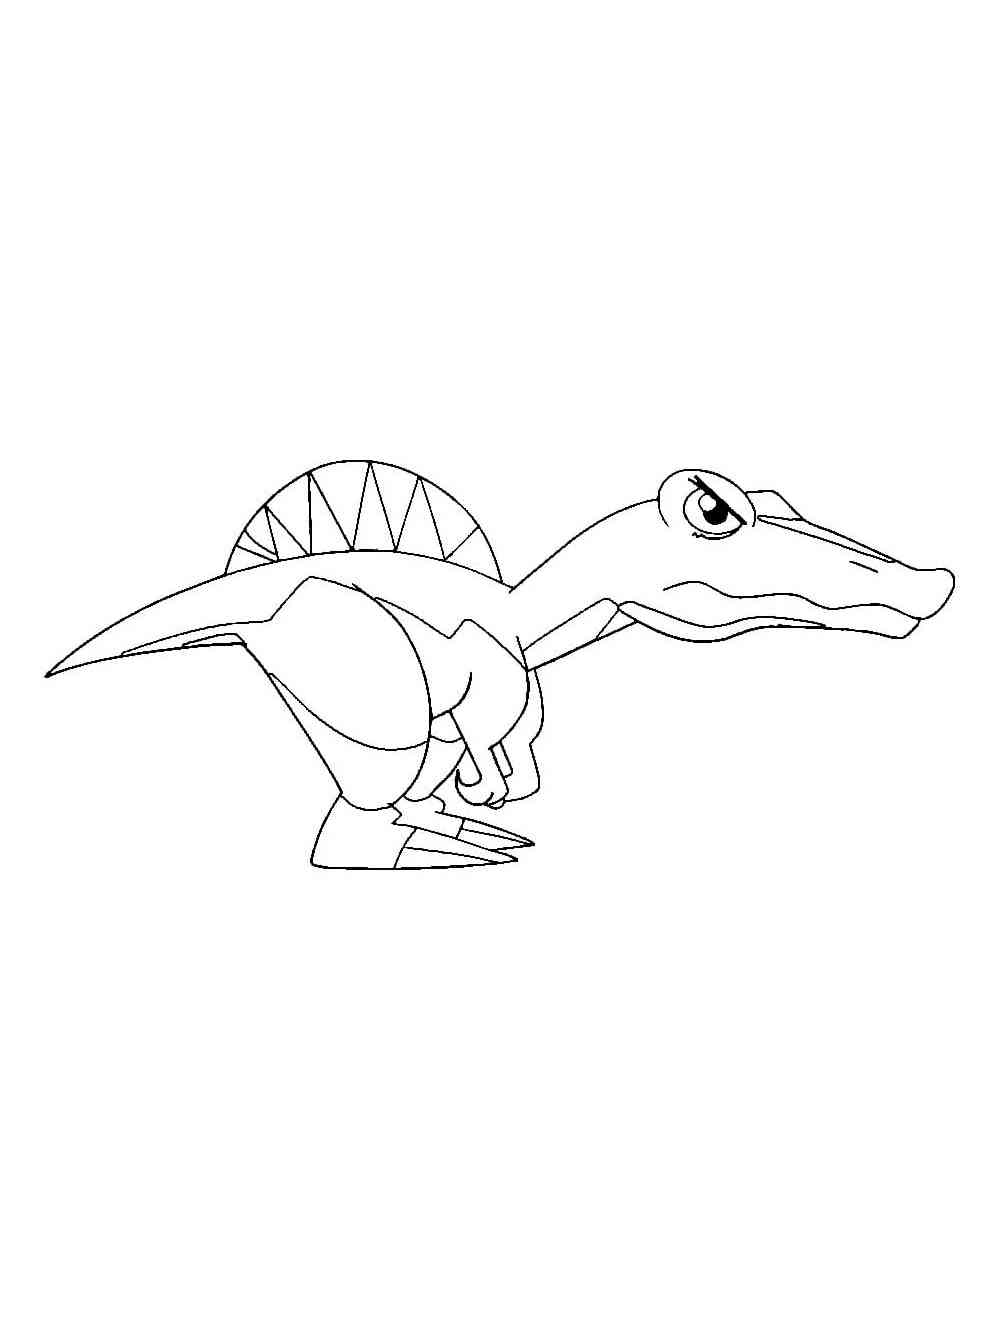 Little Spinosaurus coloring page